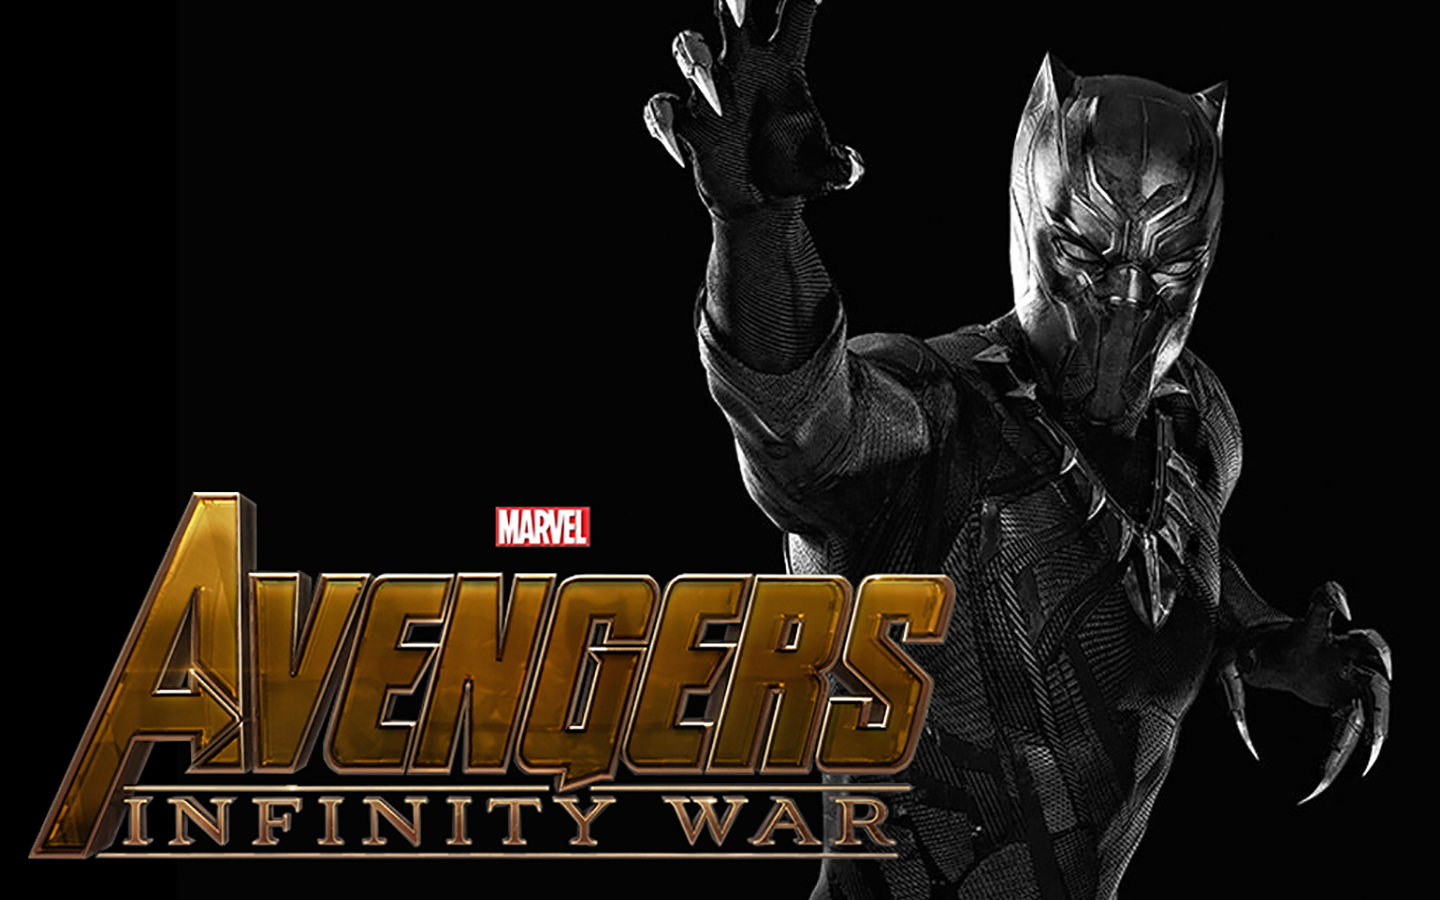 Latest Casting Call for ‘Avengers: Infinity War’ Could Point to Black Panther